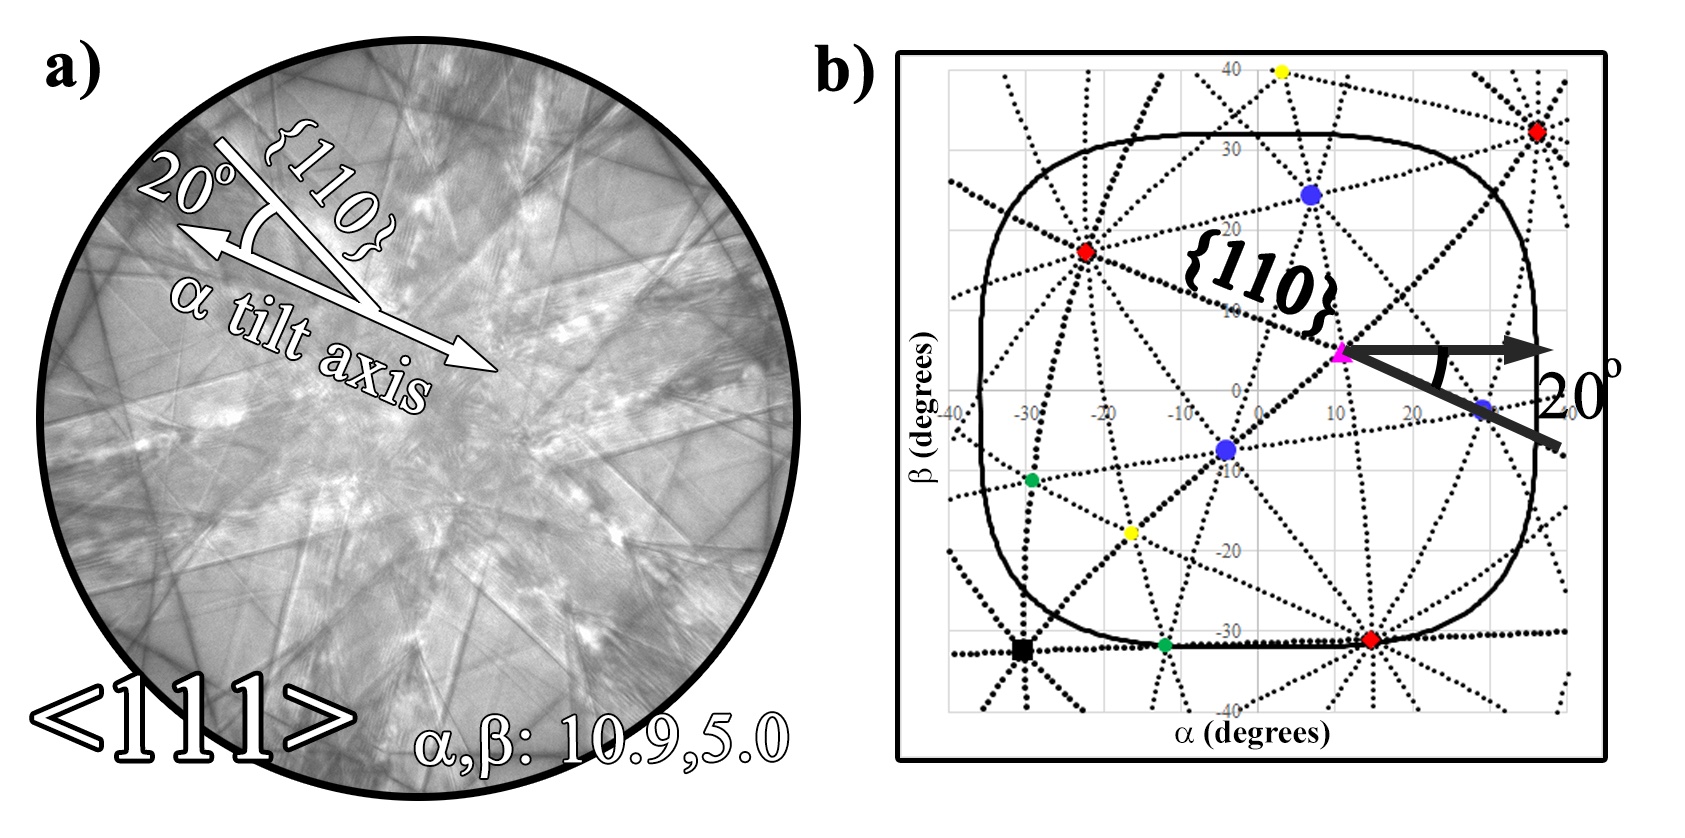 Determination of orientation of a known cubic crystal by
measuring angles with relationship to the α tilt axis using a Kikuchi
pattern (a) and plotting out the pattern with respect to the α tilt axis
(b).